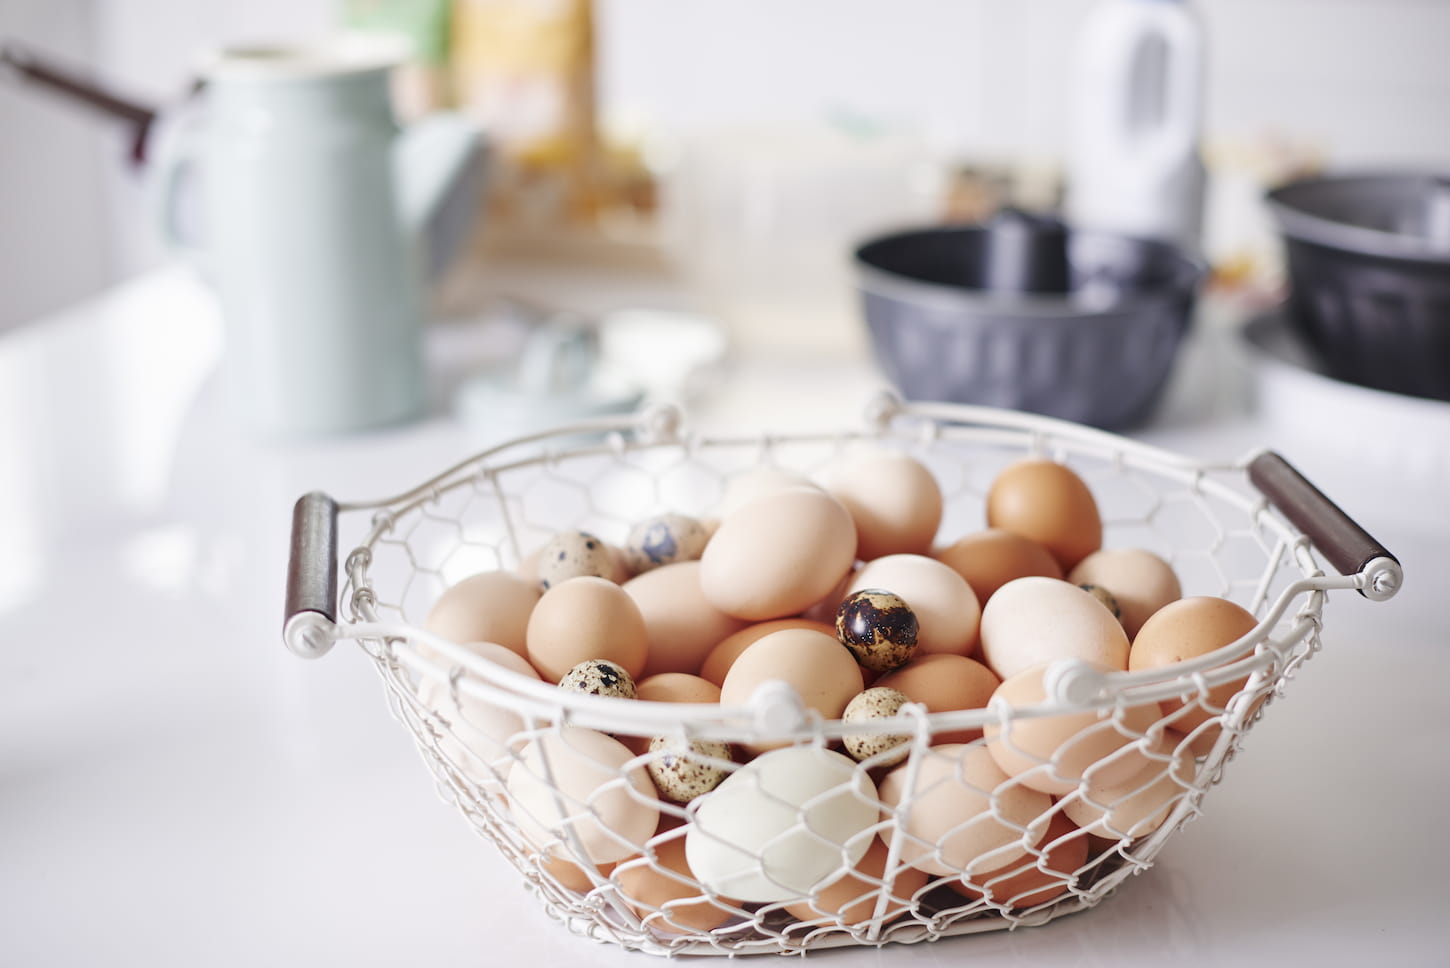 An image of a basket full of eggs on the kitchen counter.